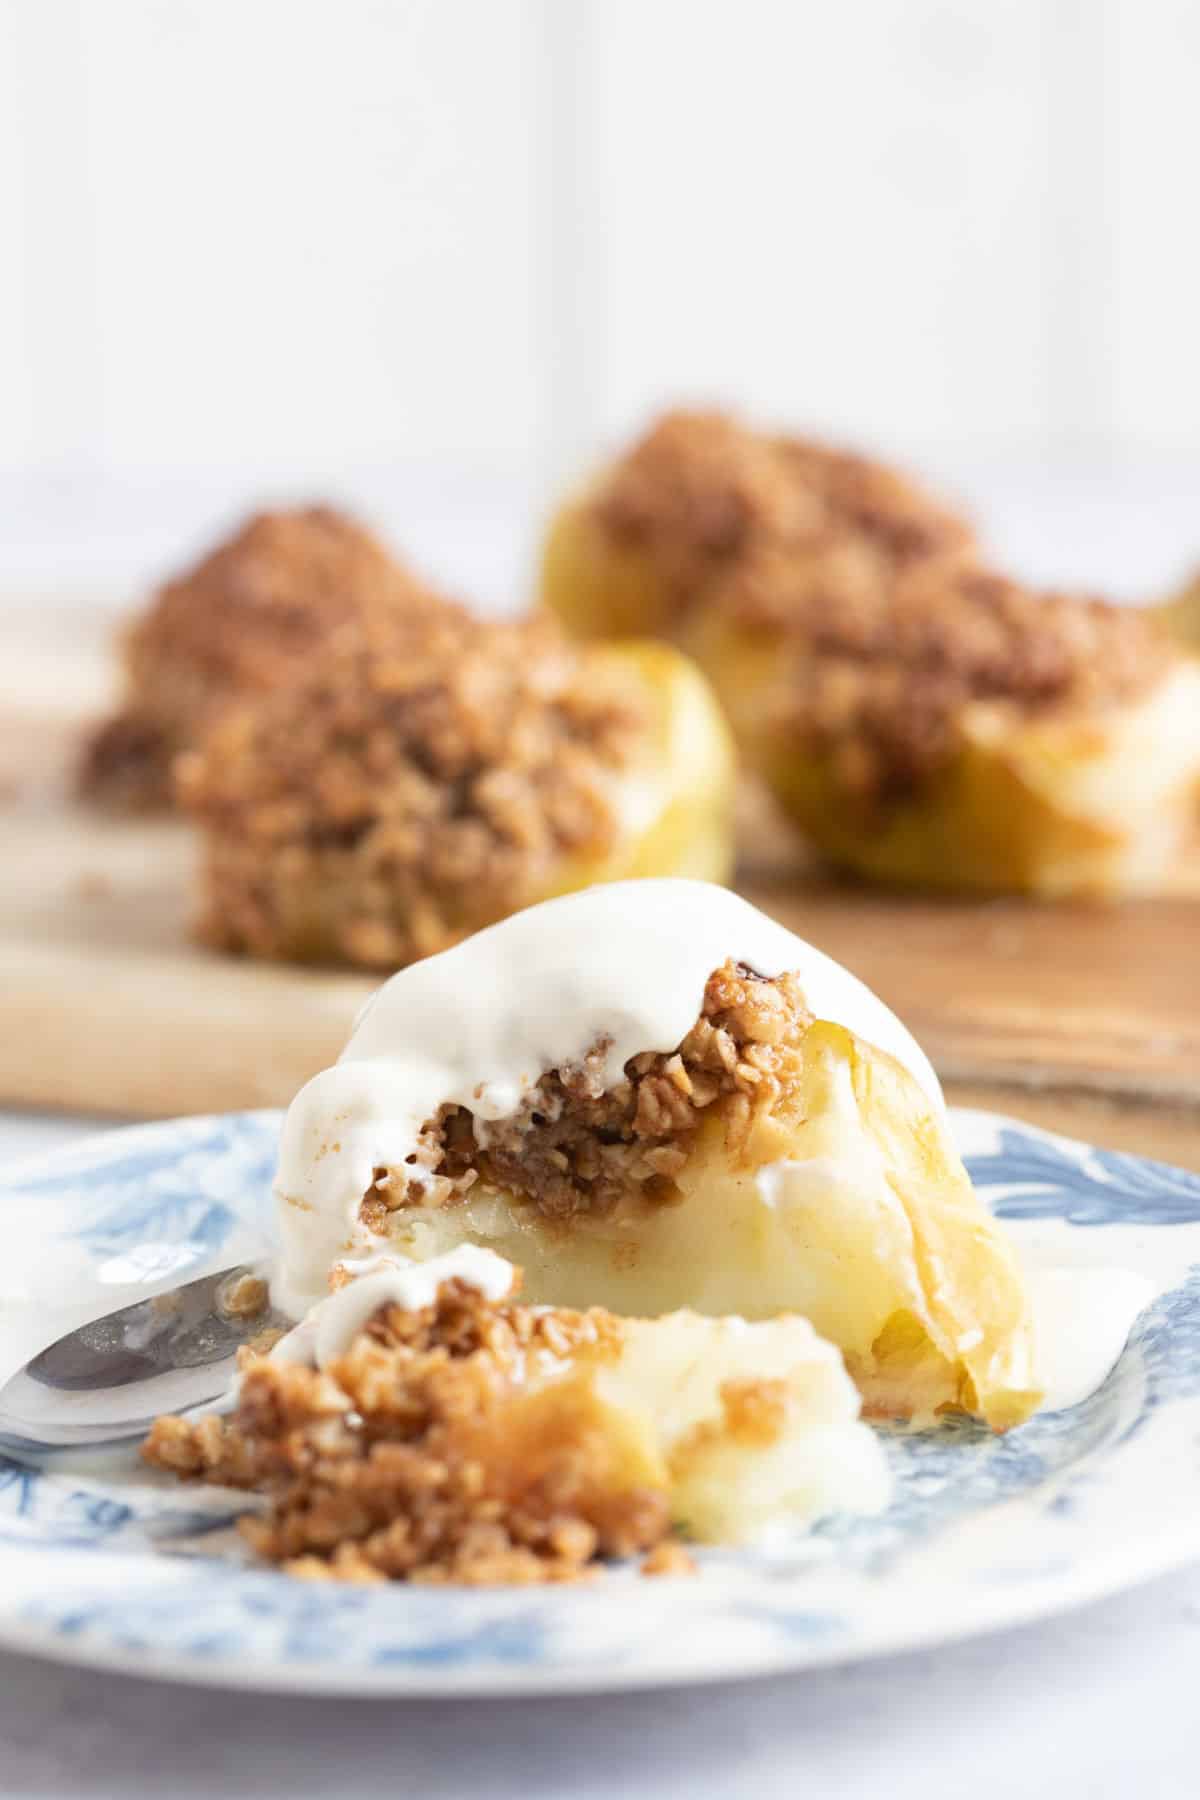 Air fryer baked apple on a plate with cream.